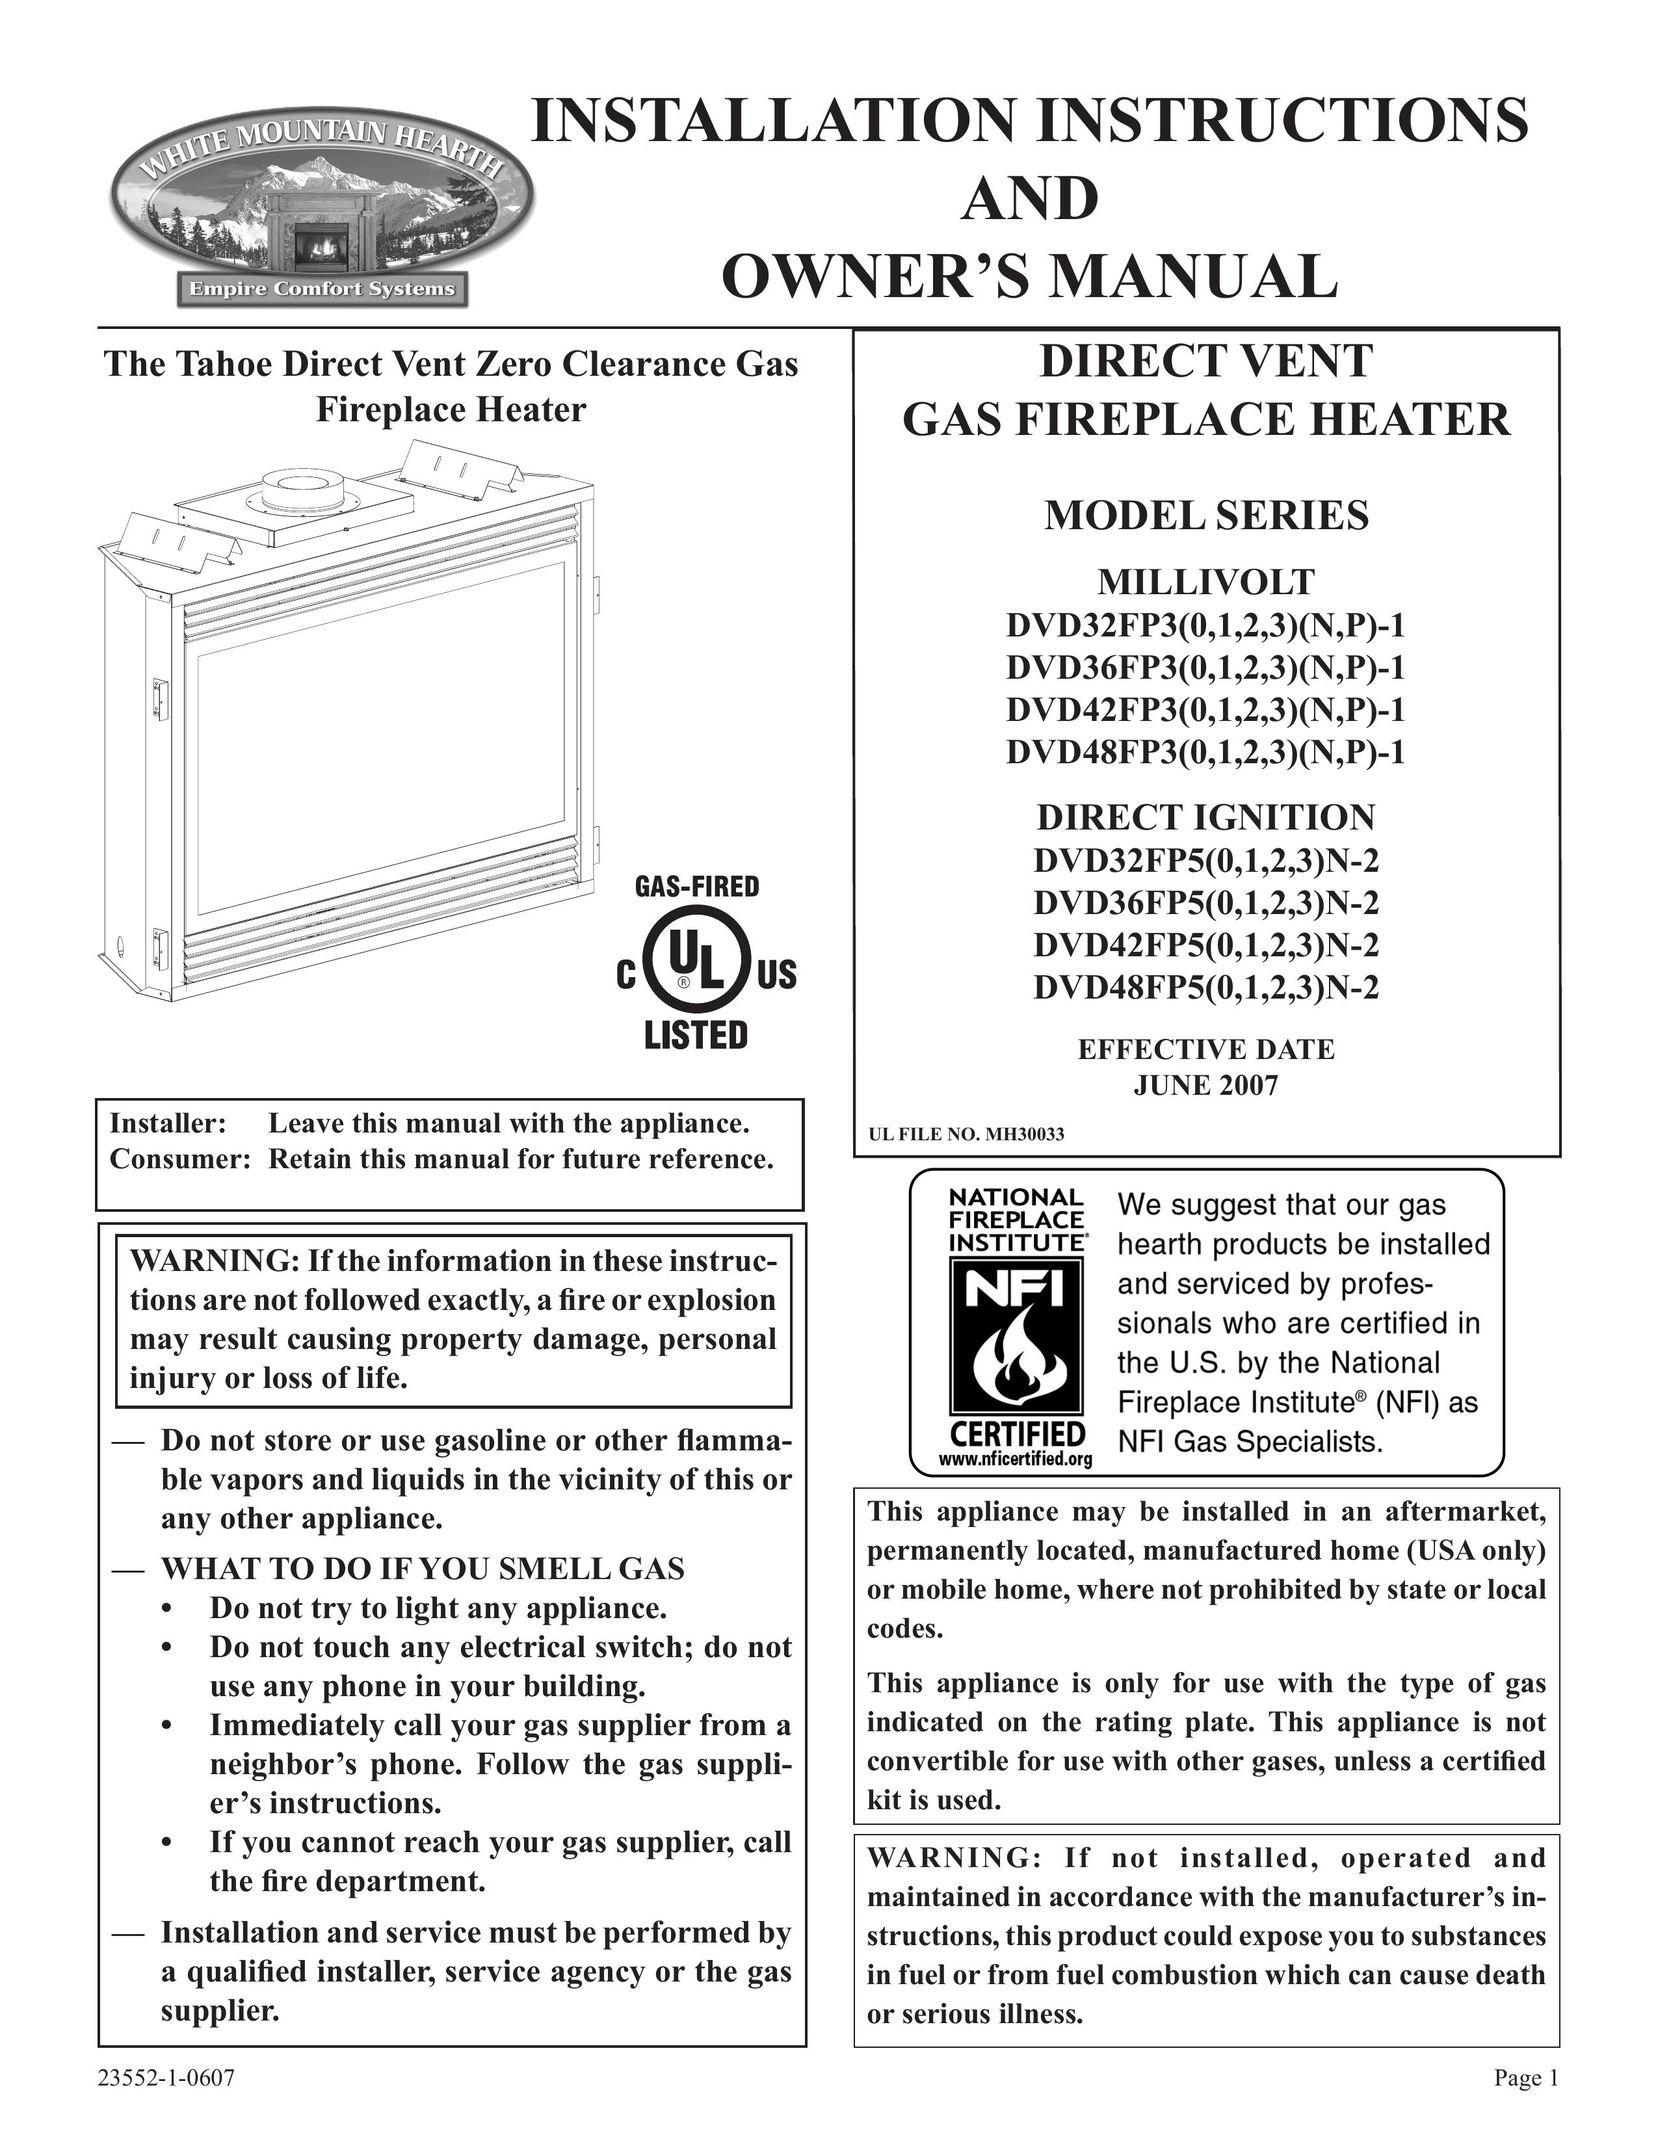 Empire Comfort Systems DVD42FP5 Indoor Fireplace User Manual